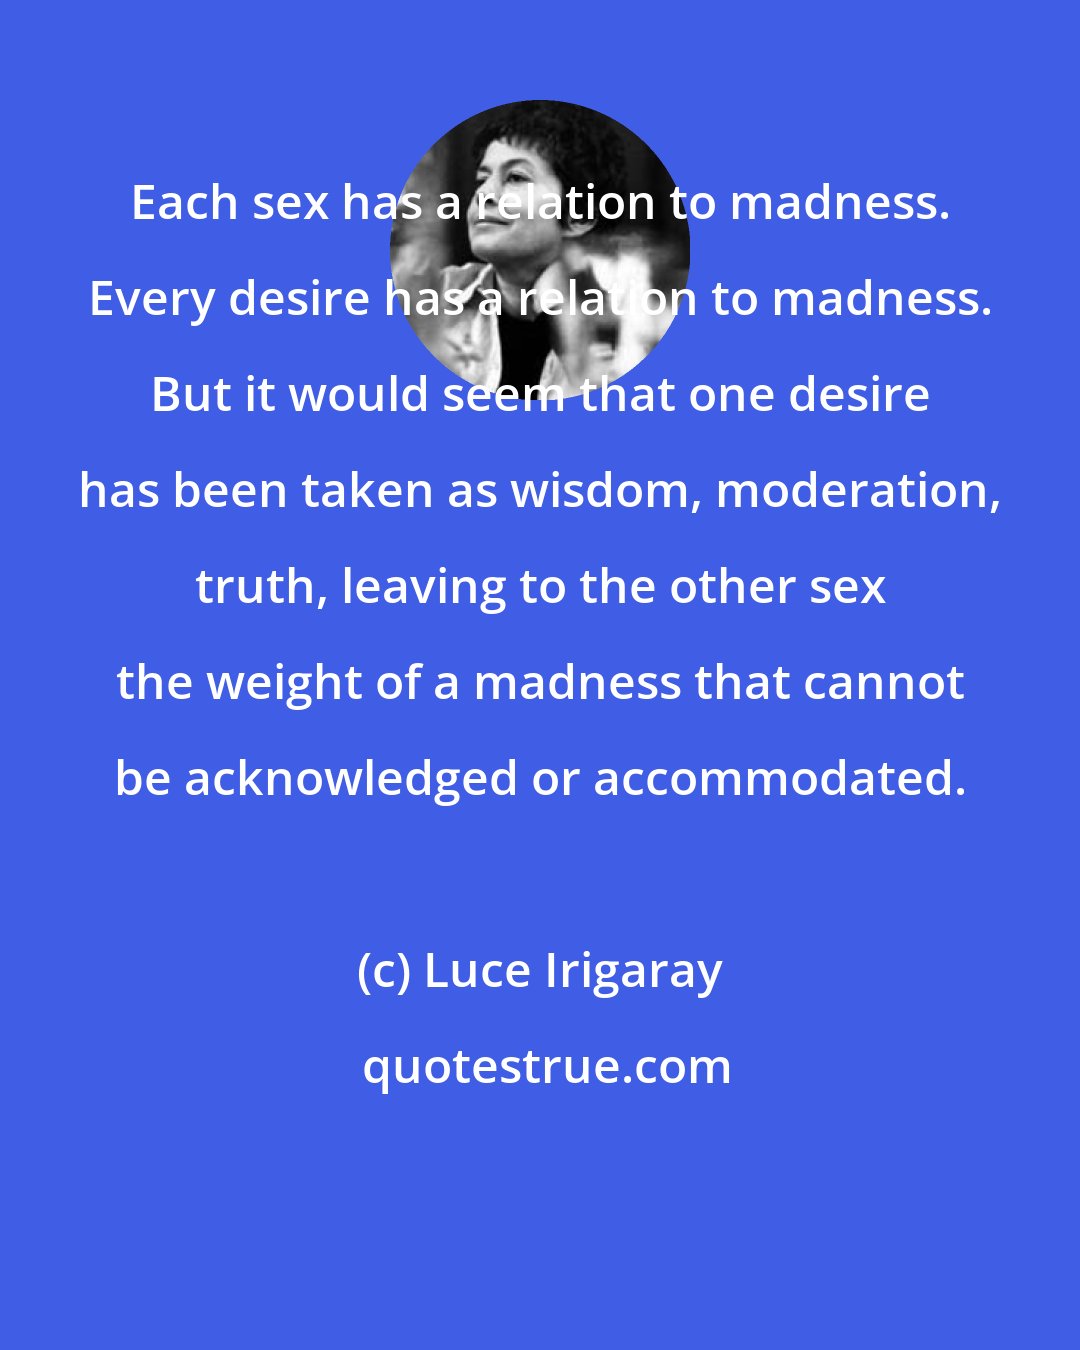 Luce Irigaray: Each sex has a relation to madness. Every desire has a relation to madness. But it would seem that one desire has been taken as wisdom, moderation, truth, leaving to the other sex the weight of a madness that cannot be acknowledged or accommodated.